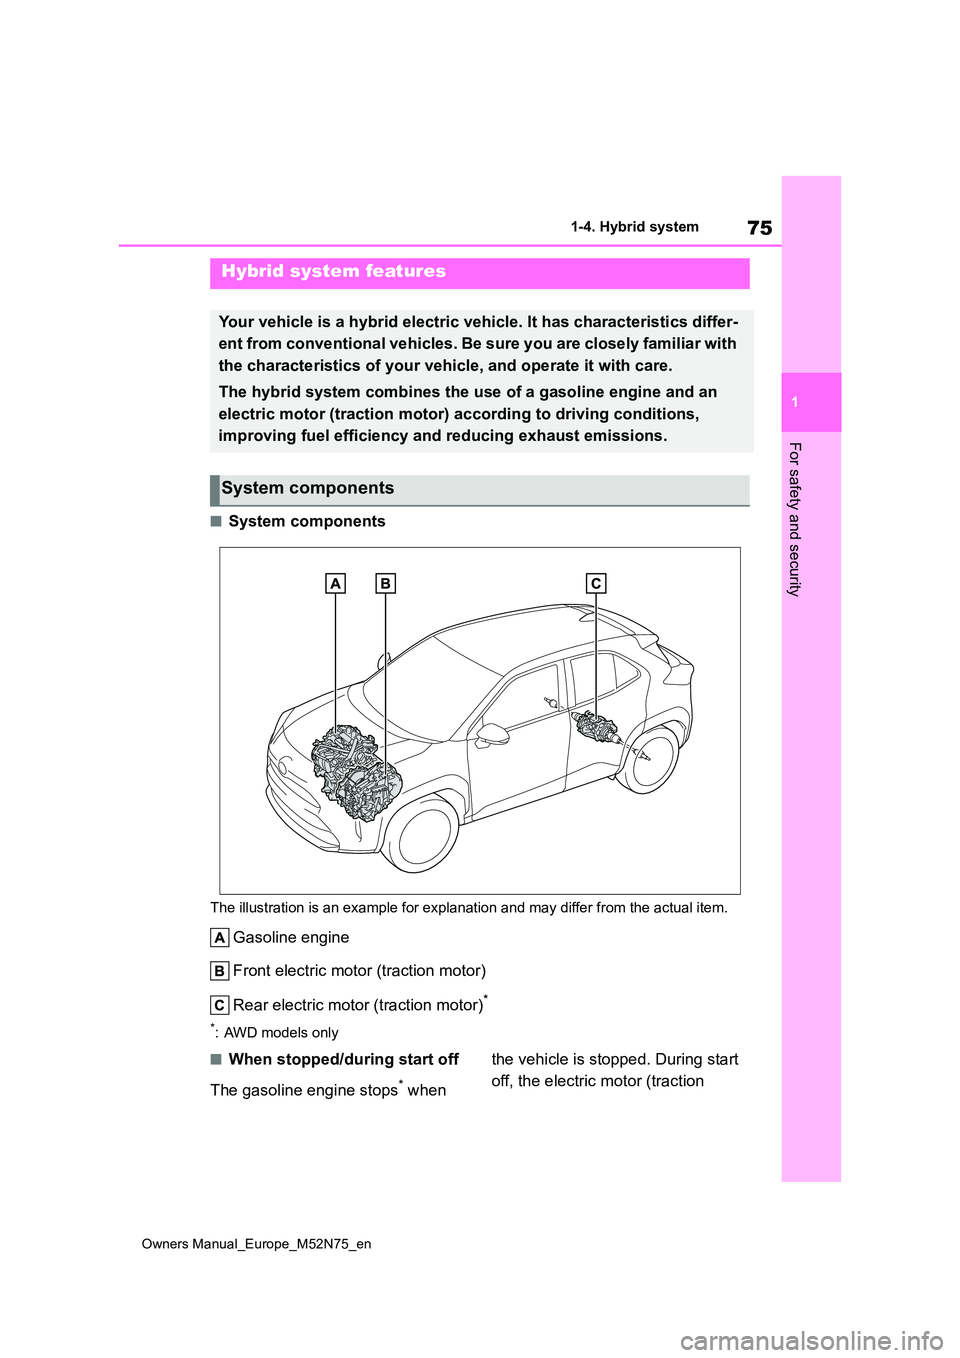 TOYOTA YARIS CROSS 2023  Owners Manual 75
1
Owners Manual_Europe_M52N75_en
1-4. Hybrid system
For safety and security
1-4.Hybrid  sy stem
■System components
The illustration is an example for explanation and may differ from the actual it